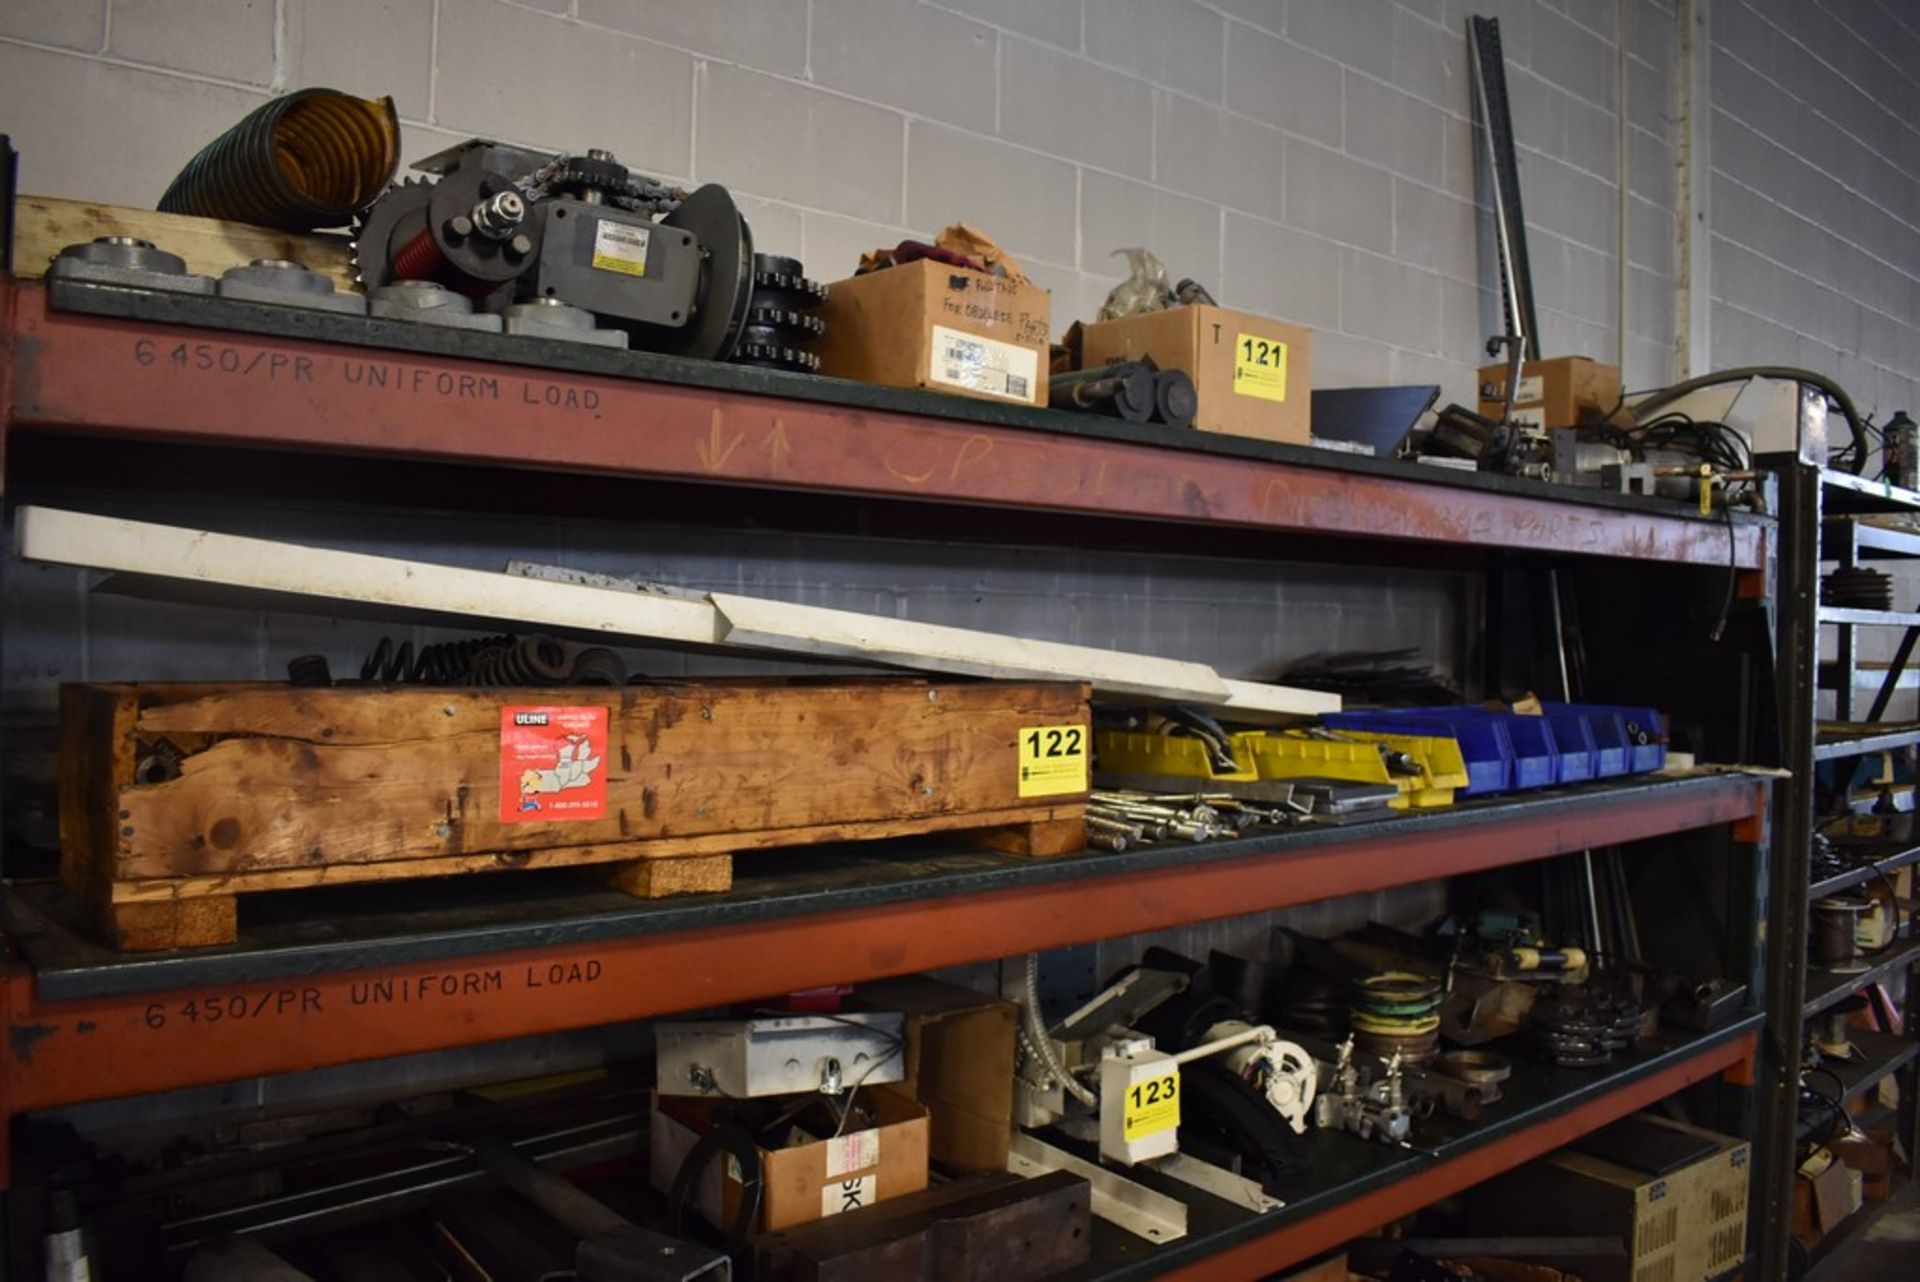 ASSORTED CONTENTS ON (1) SHELF OF PALLET RACKING